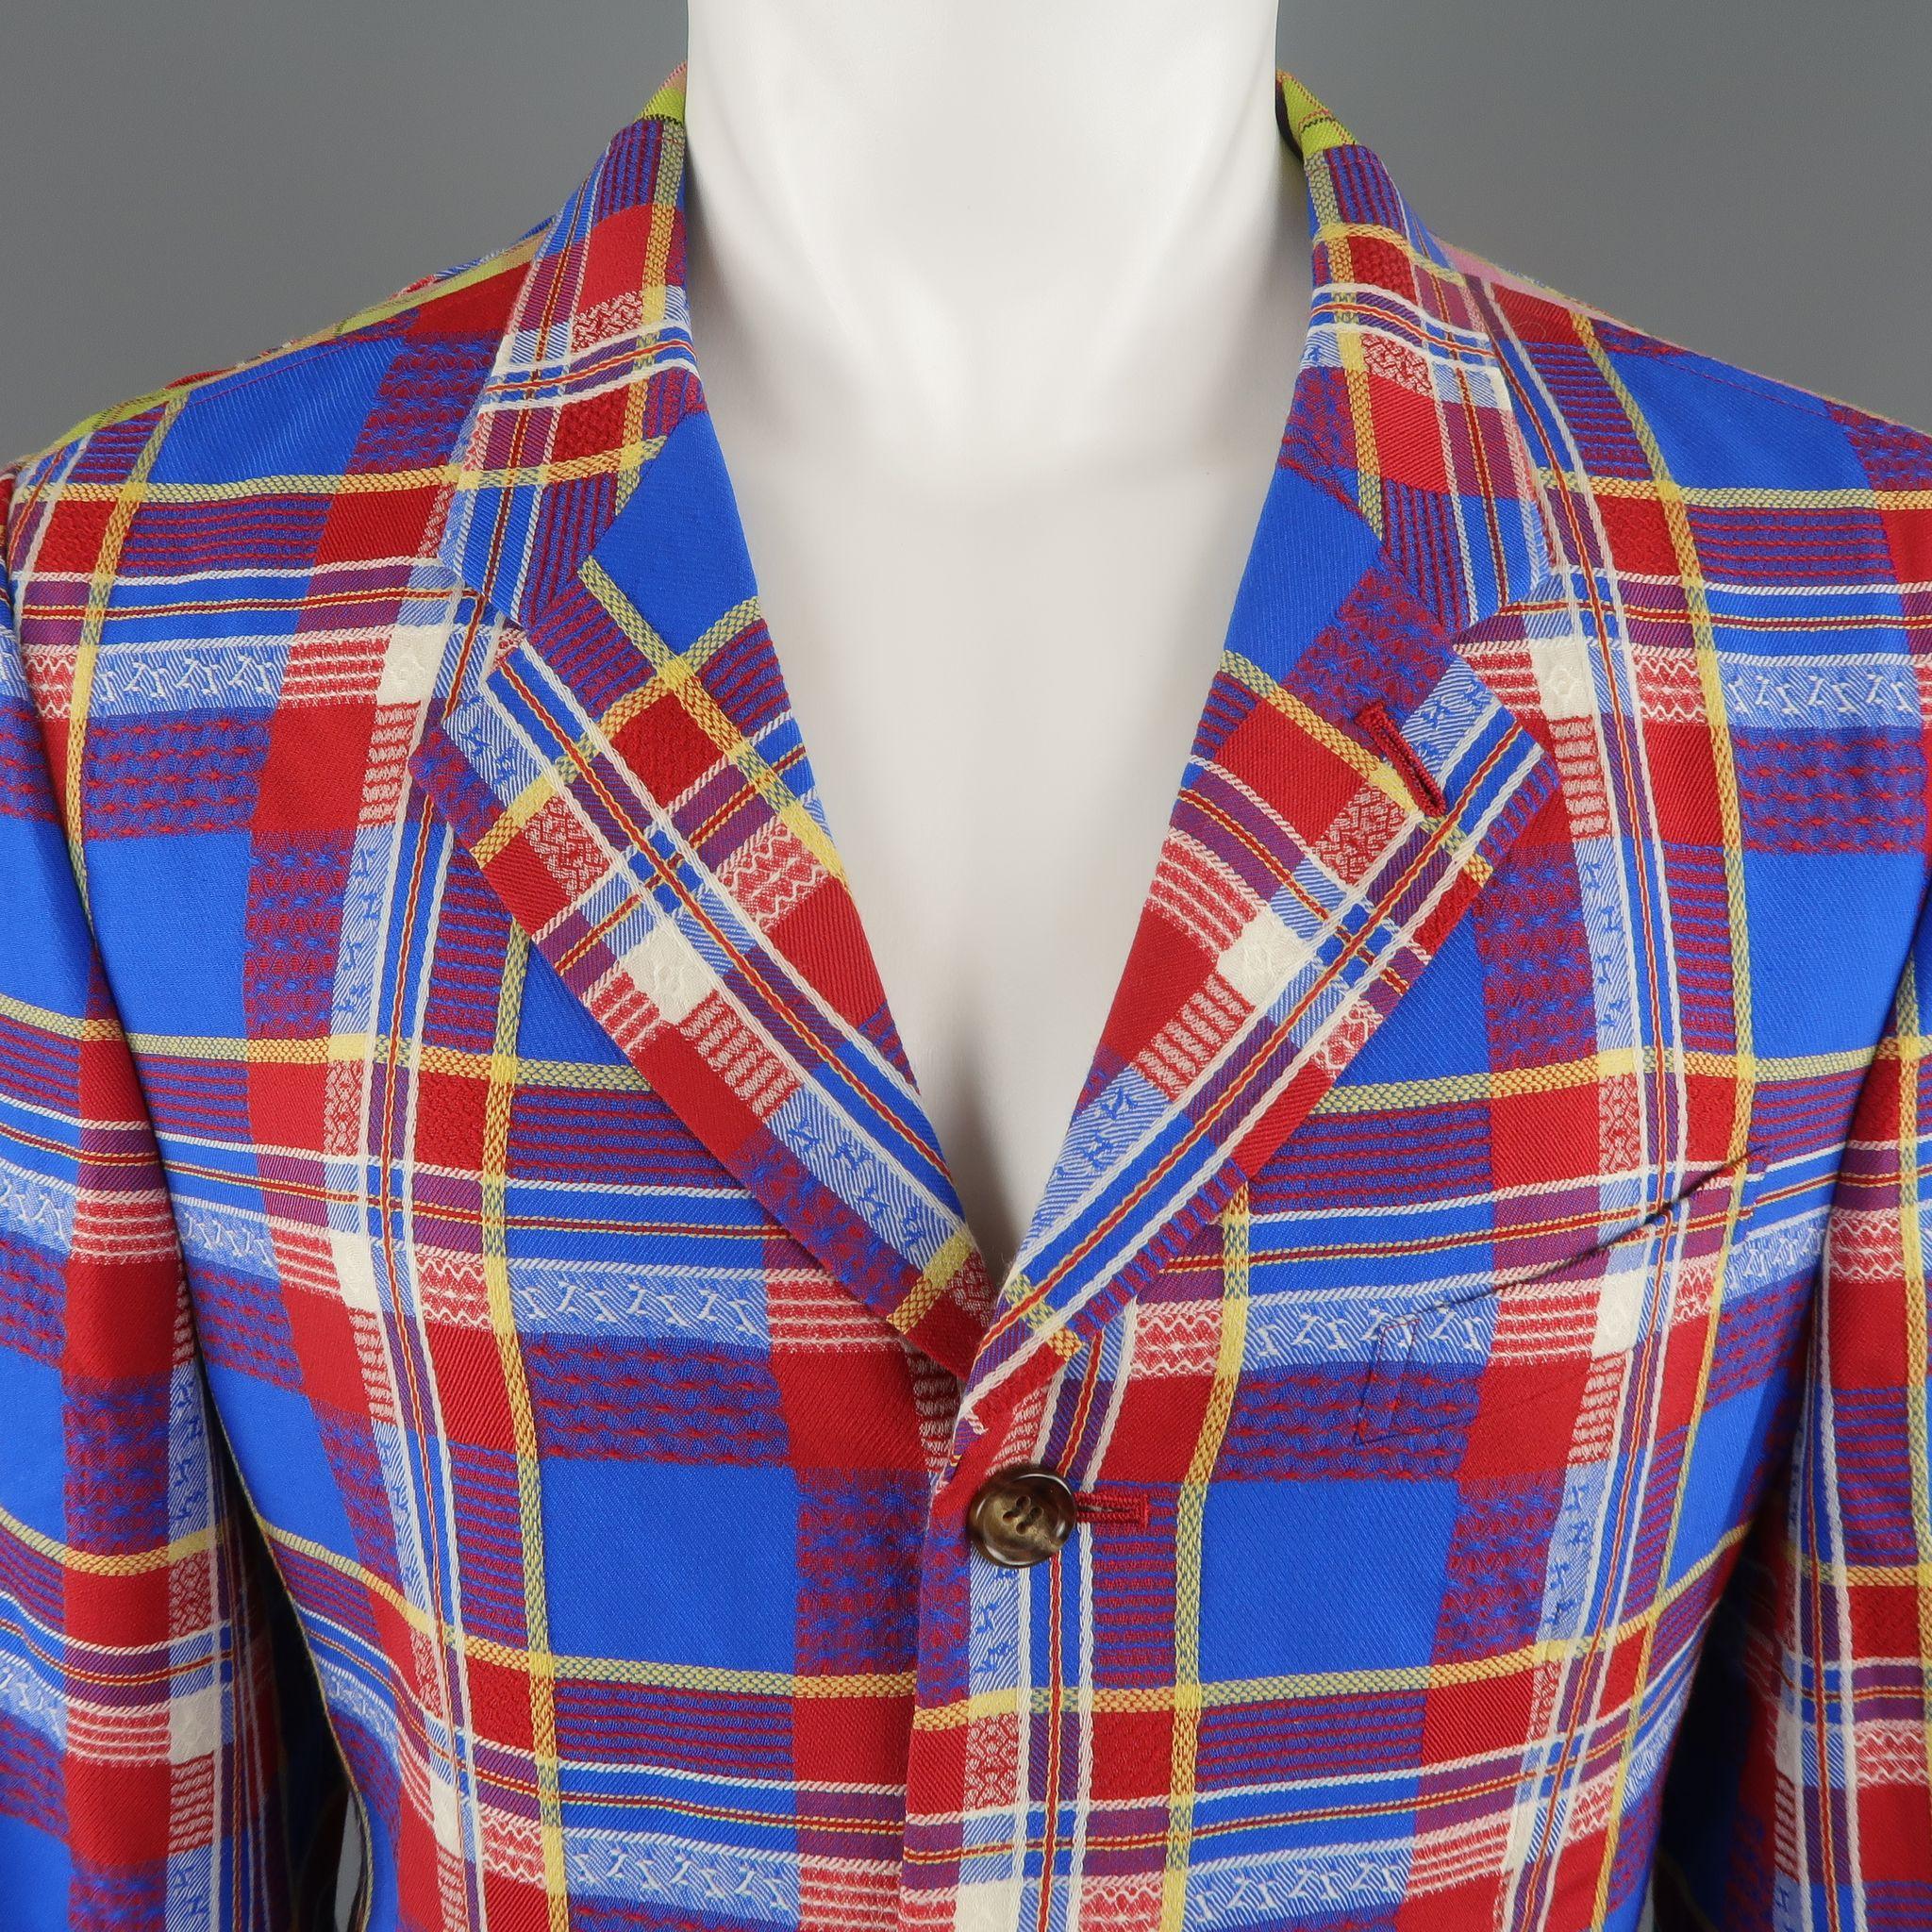 This rare vintage COMME des GARCONS HOMME PLUS circa 2001 Docking sport jacket comes in a bold blue red and yellow plaid textured wool with a notch lapel, single breasted three button front, and pink and green plaid panels throughout. Tailors faint